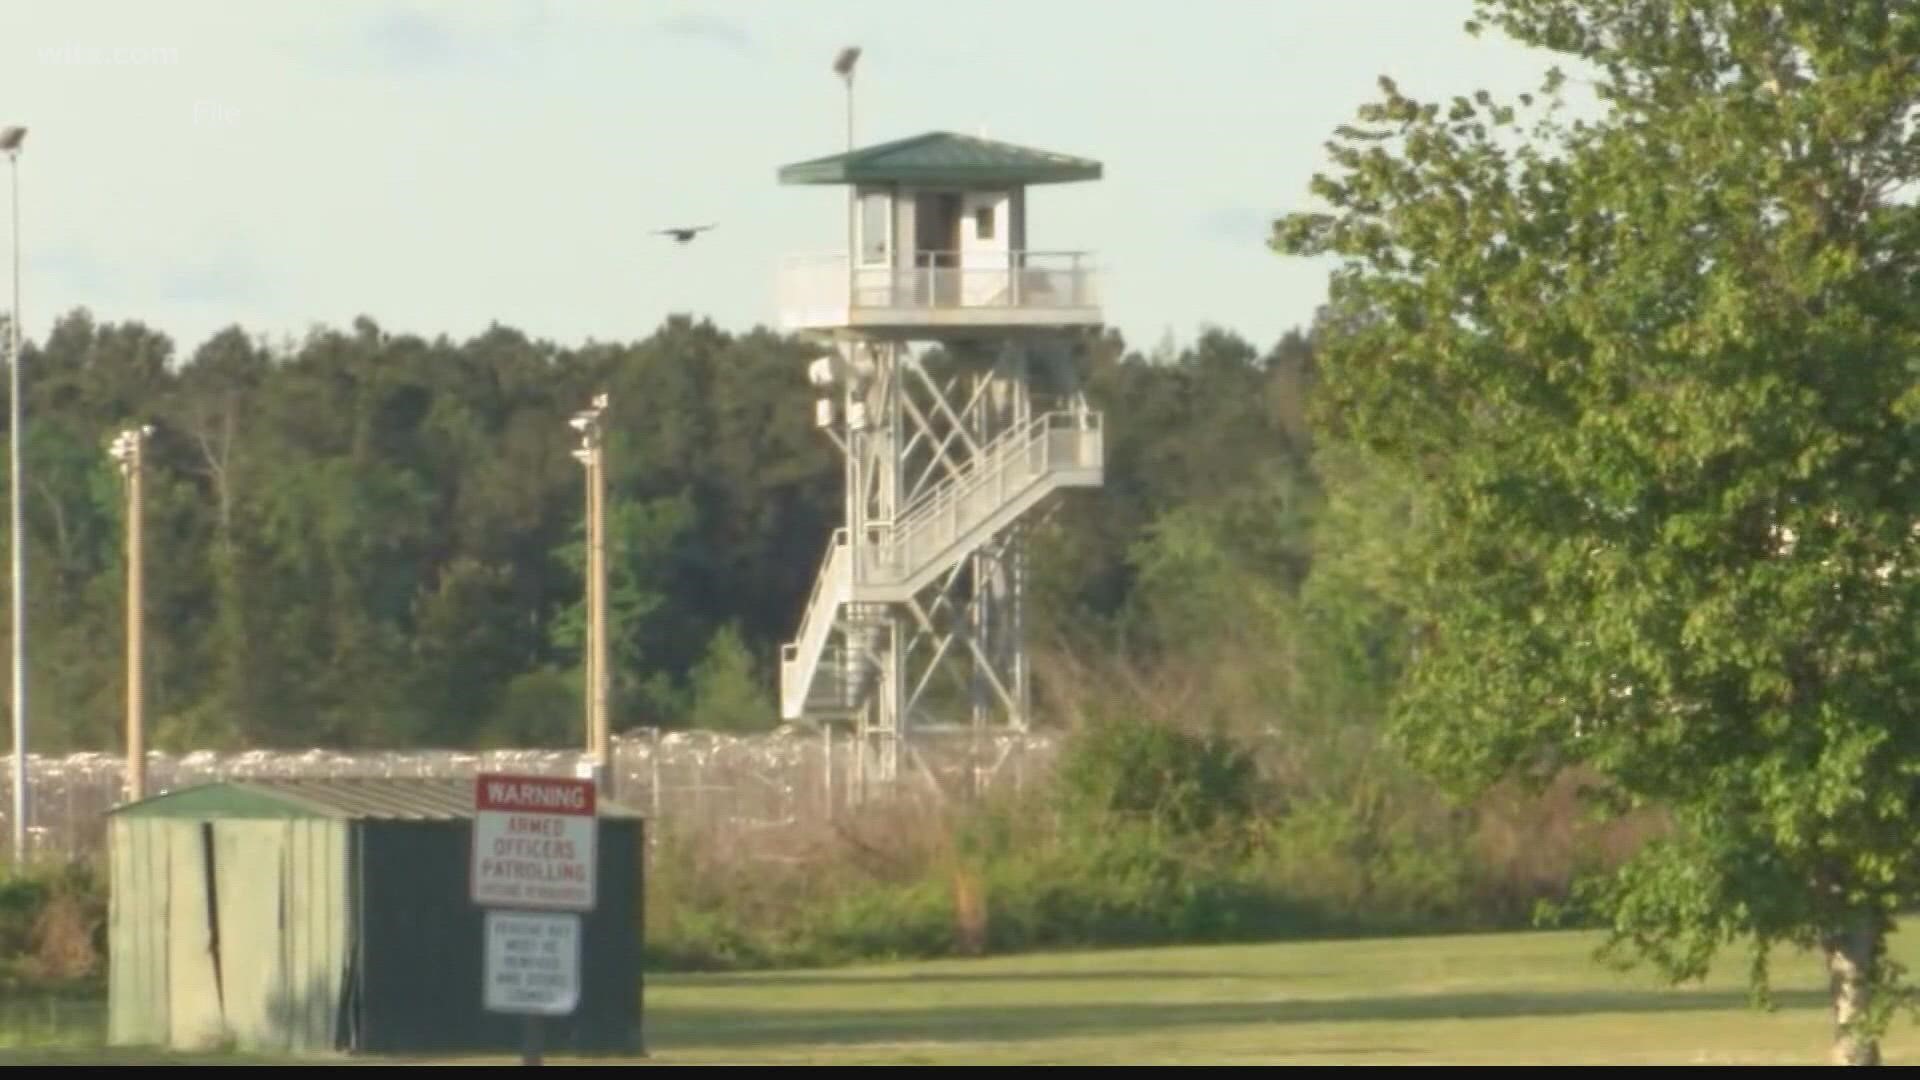 Suspects have attempted to fly drones carrying everything from candy to guns over the prison fences at Lee Correctional Institution, according to officials.